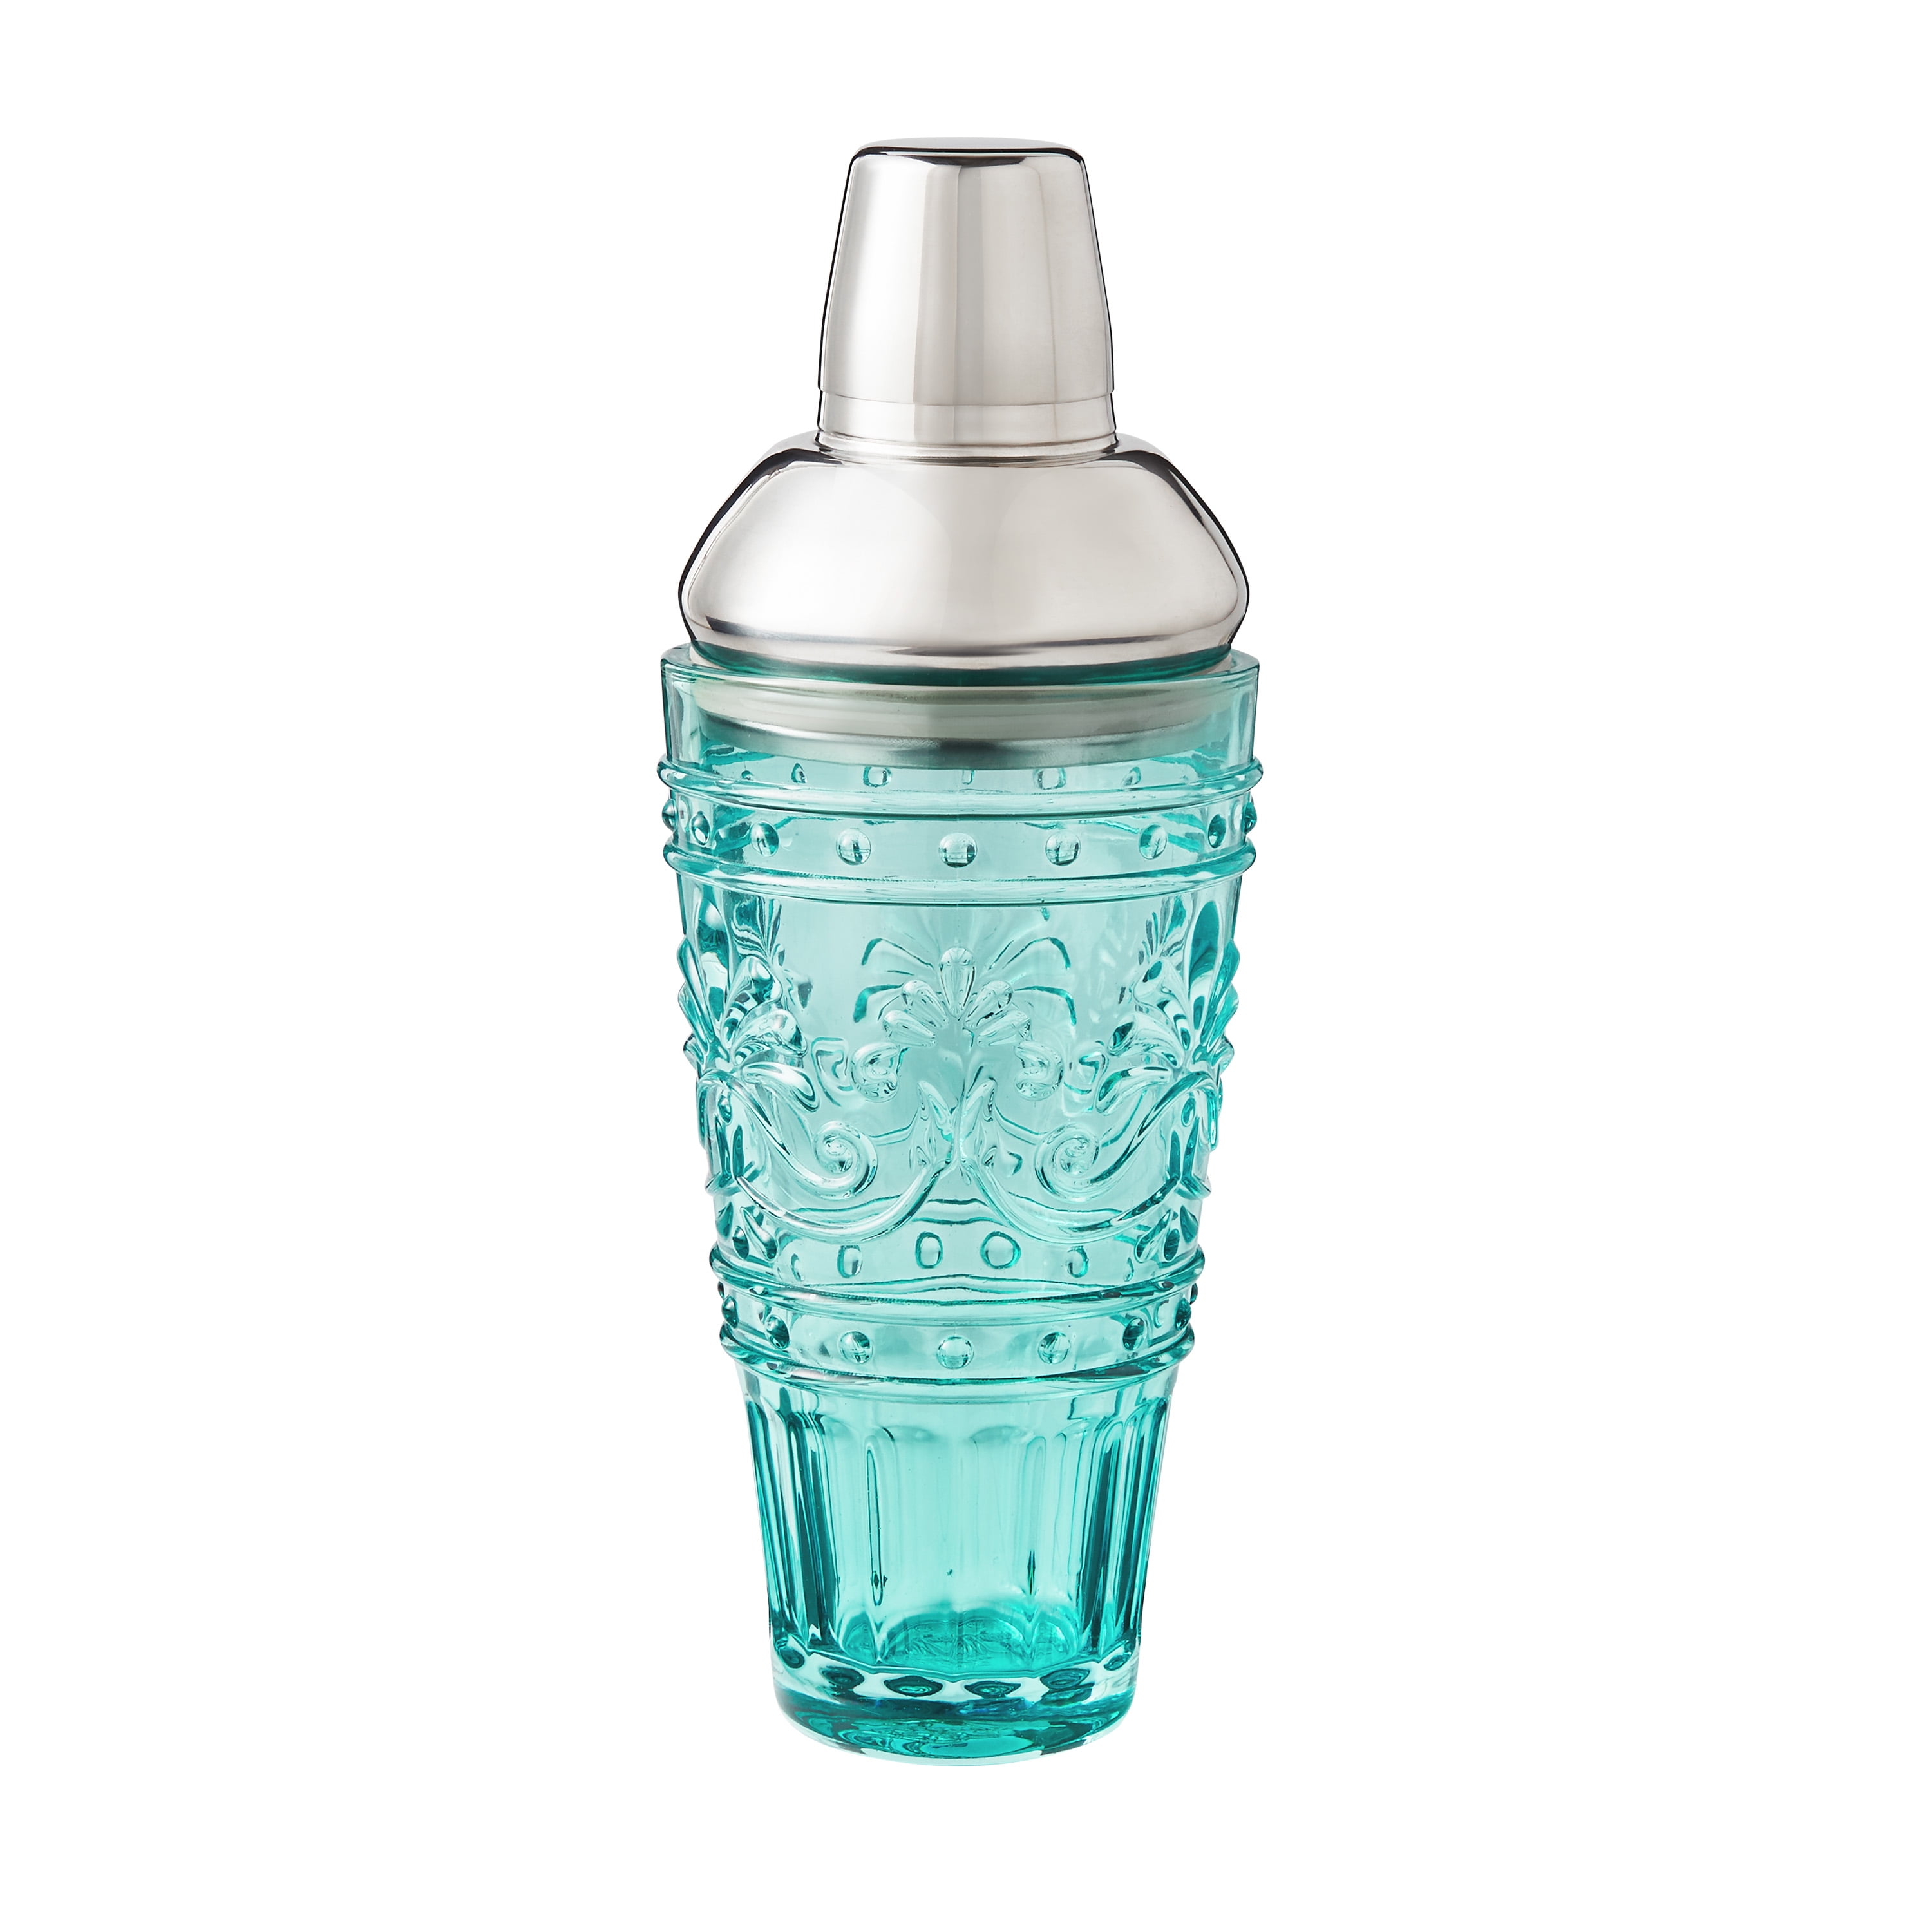 Transparent Scale Cocktail Shaker Bottle Mix Glass Drink Iced